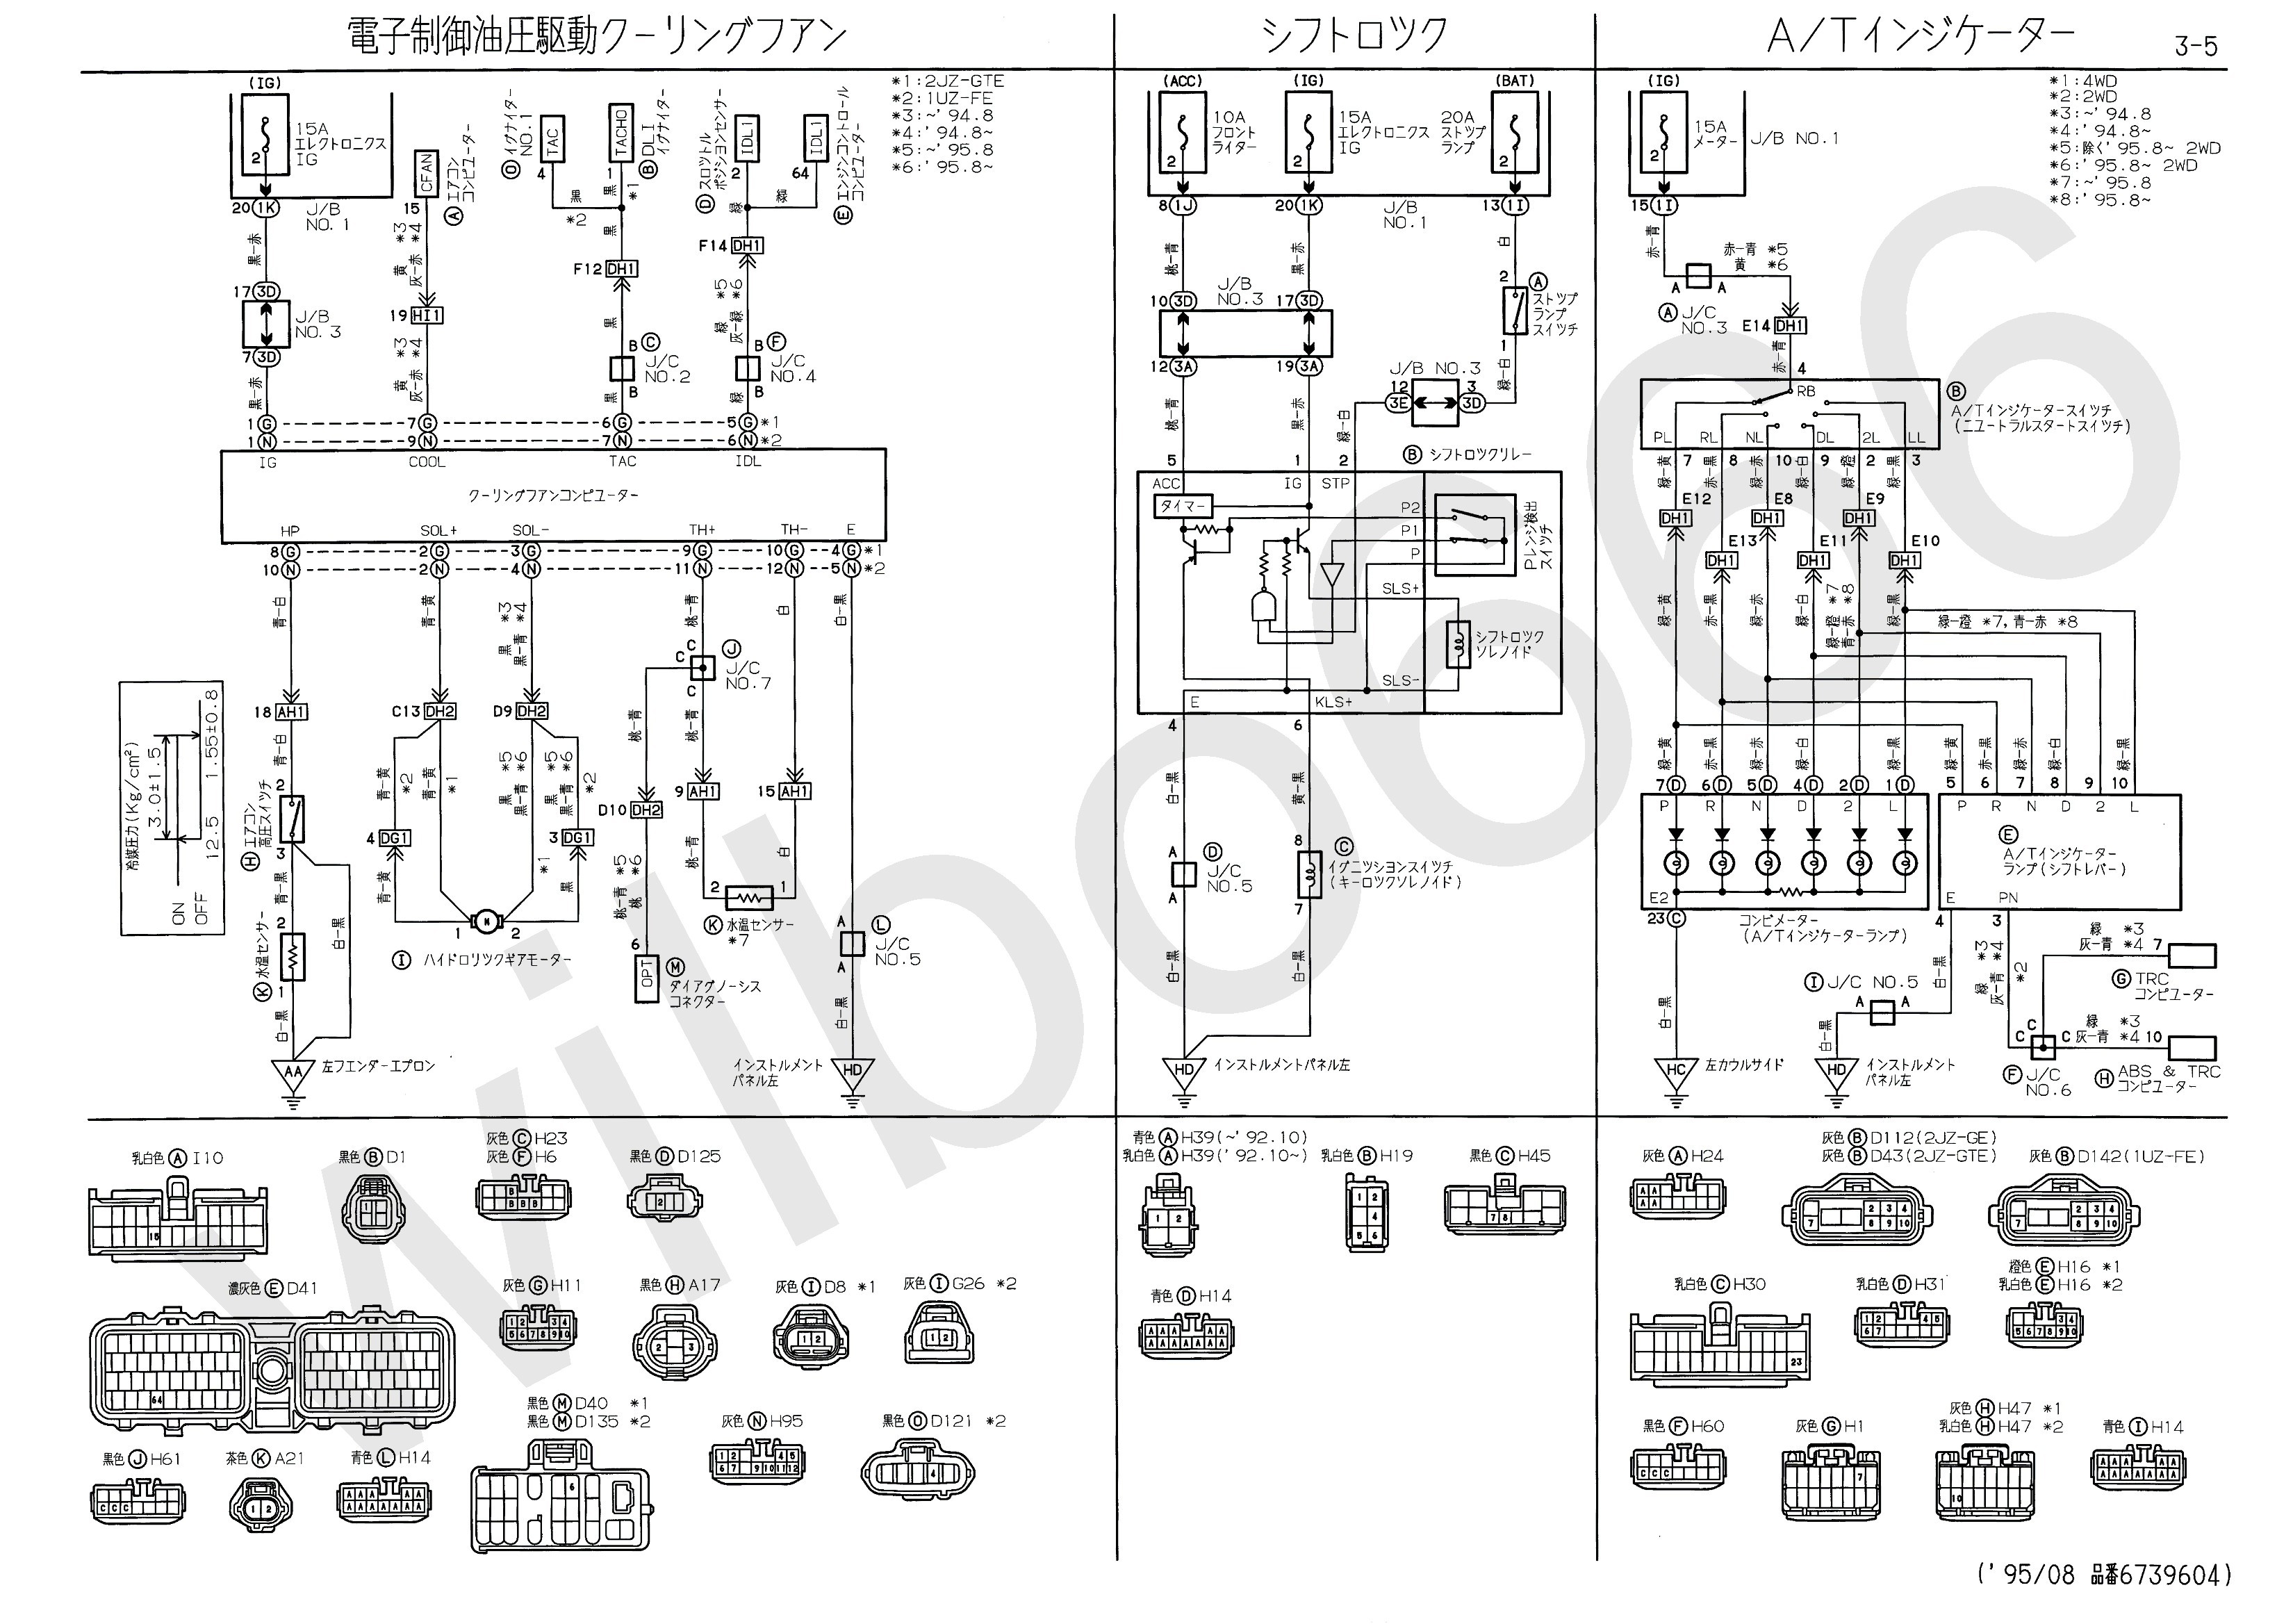 Toyota 1nz Fe Engine Wiring Diagram Awesome Mercial Electrical Wiring Basics • Electrical Outlet Of Toyota 1nz Fe Engine Wiring Diagram